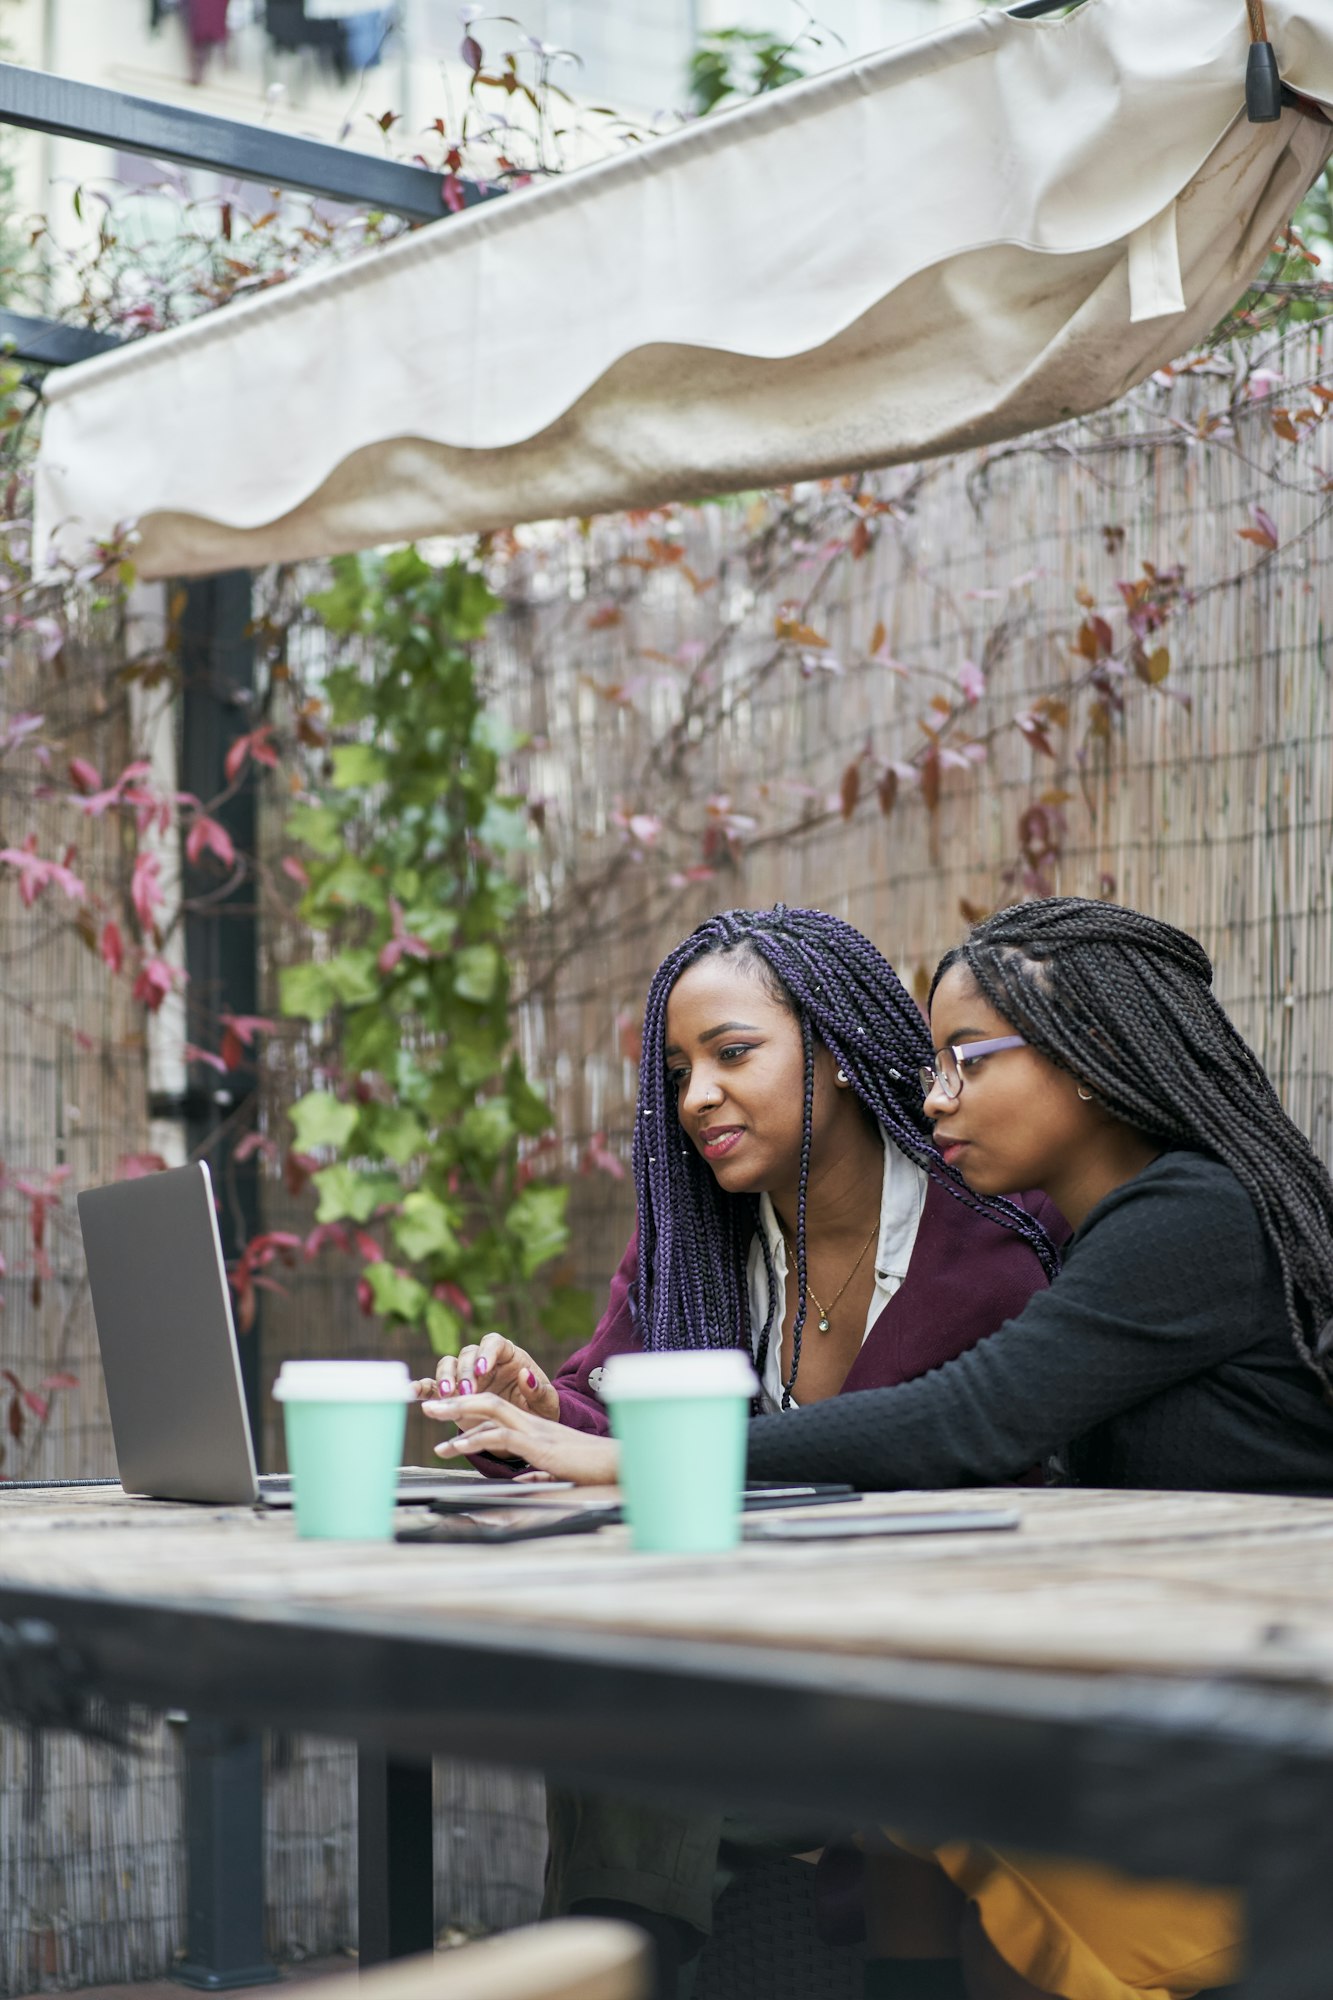 Vertical shot of two young latin women using a laptop outdoors.